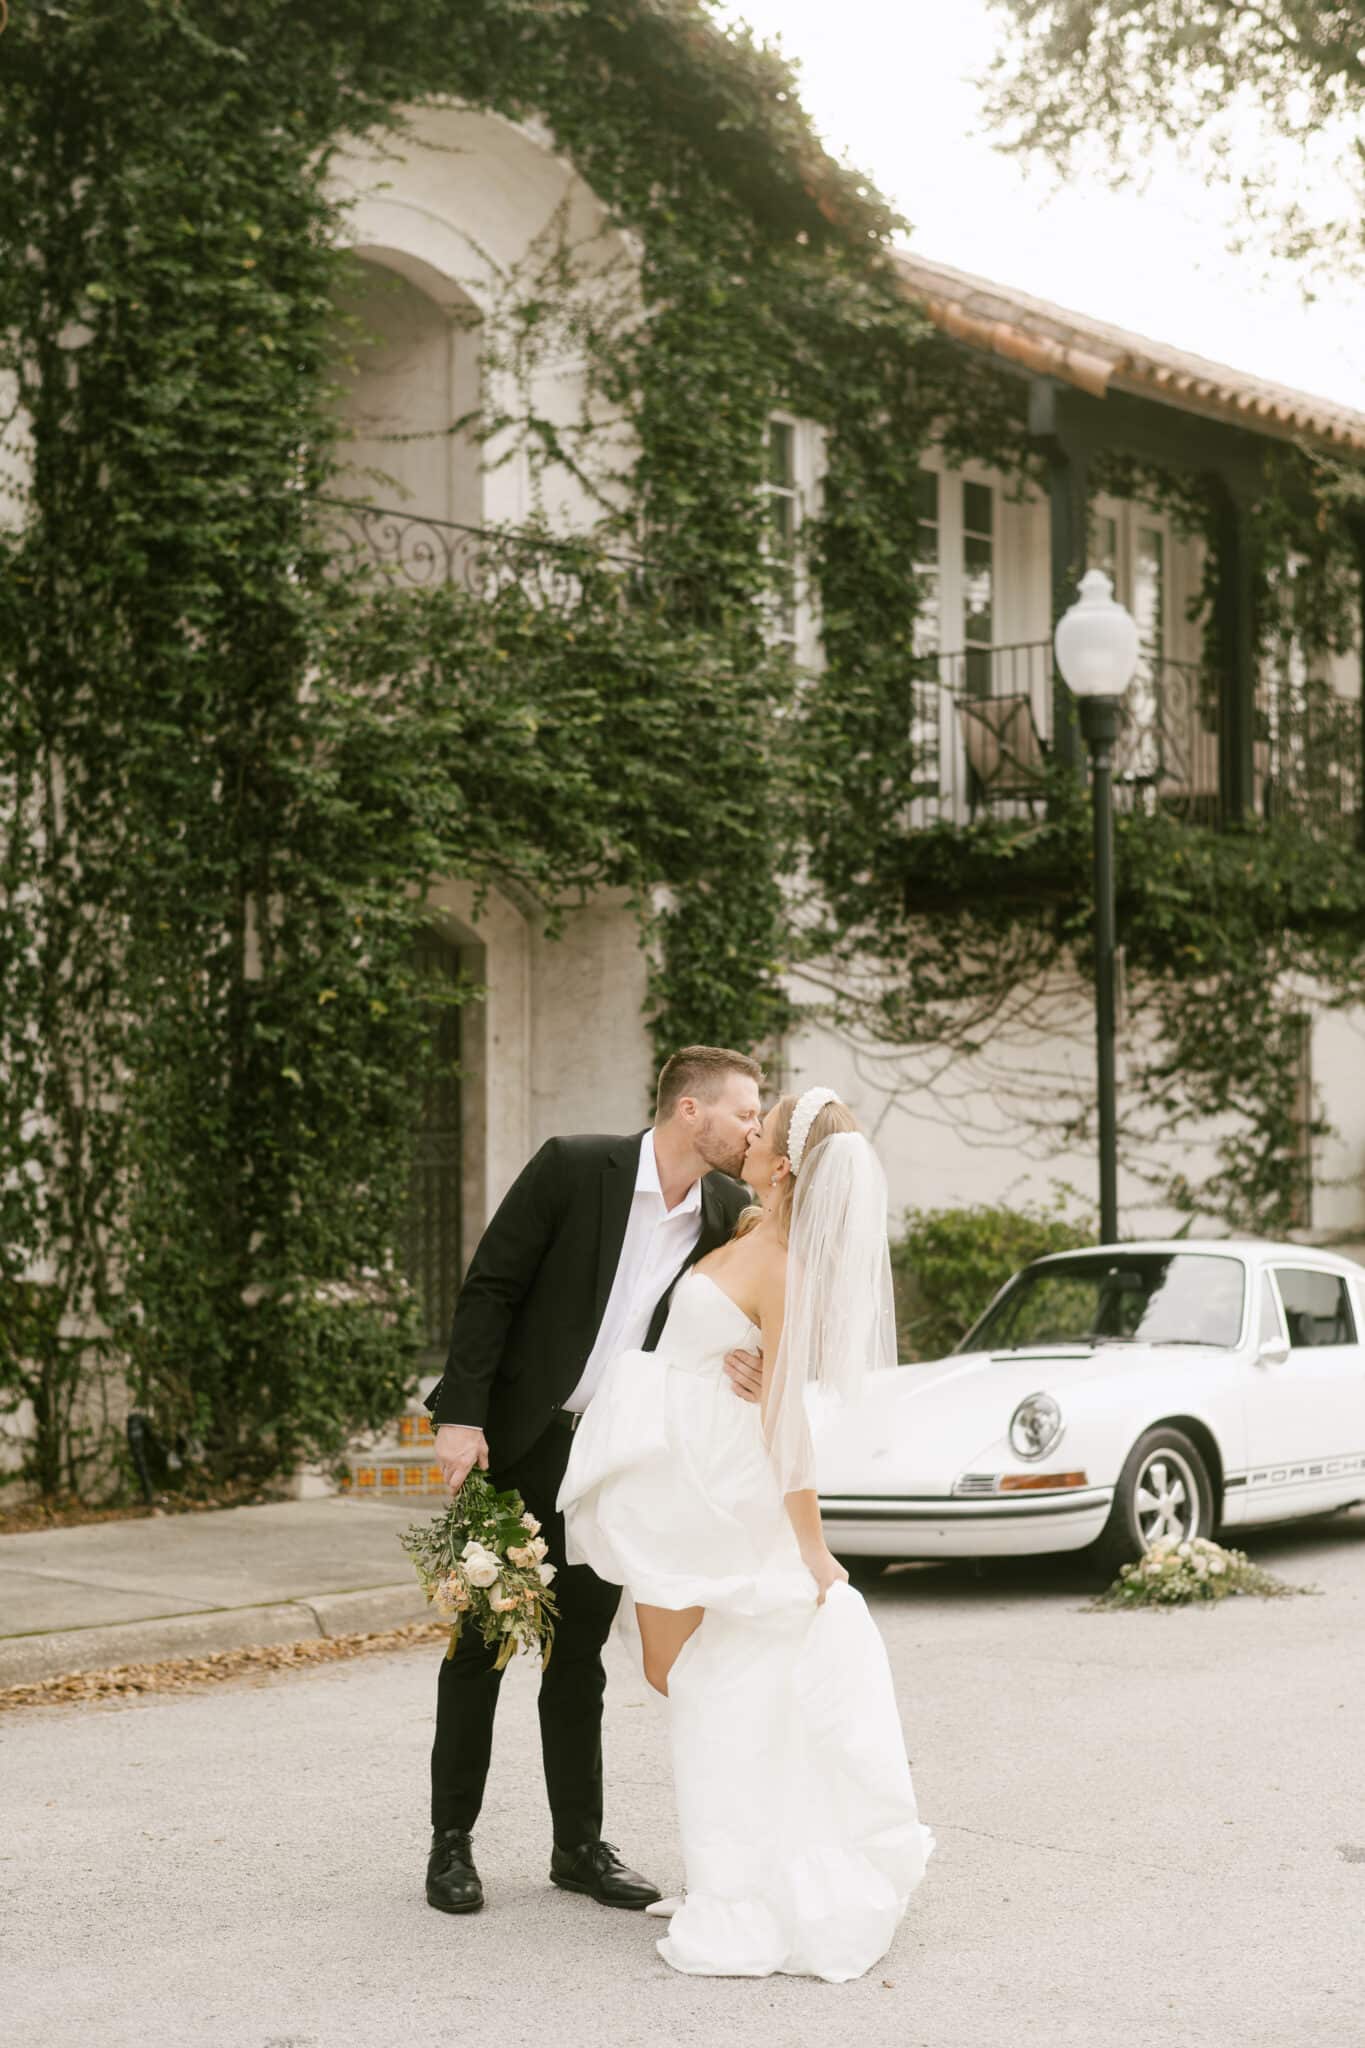 couple kiss for engagement picture outside of building with ivy on the walls and vintage car in the background